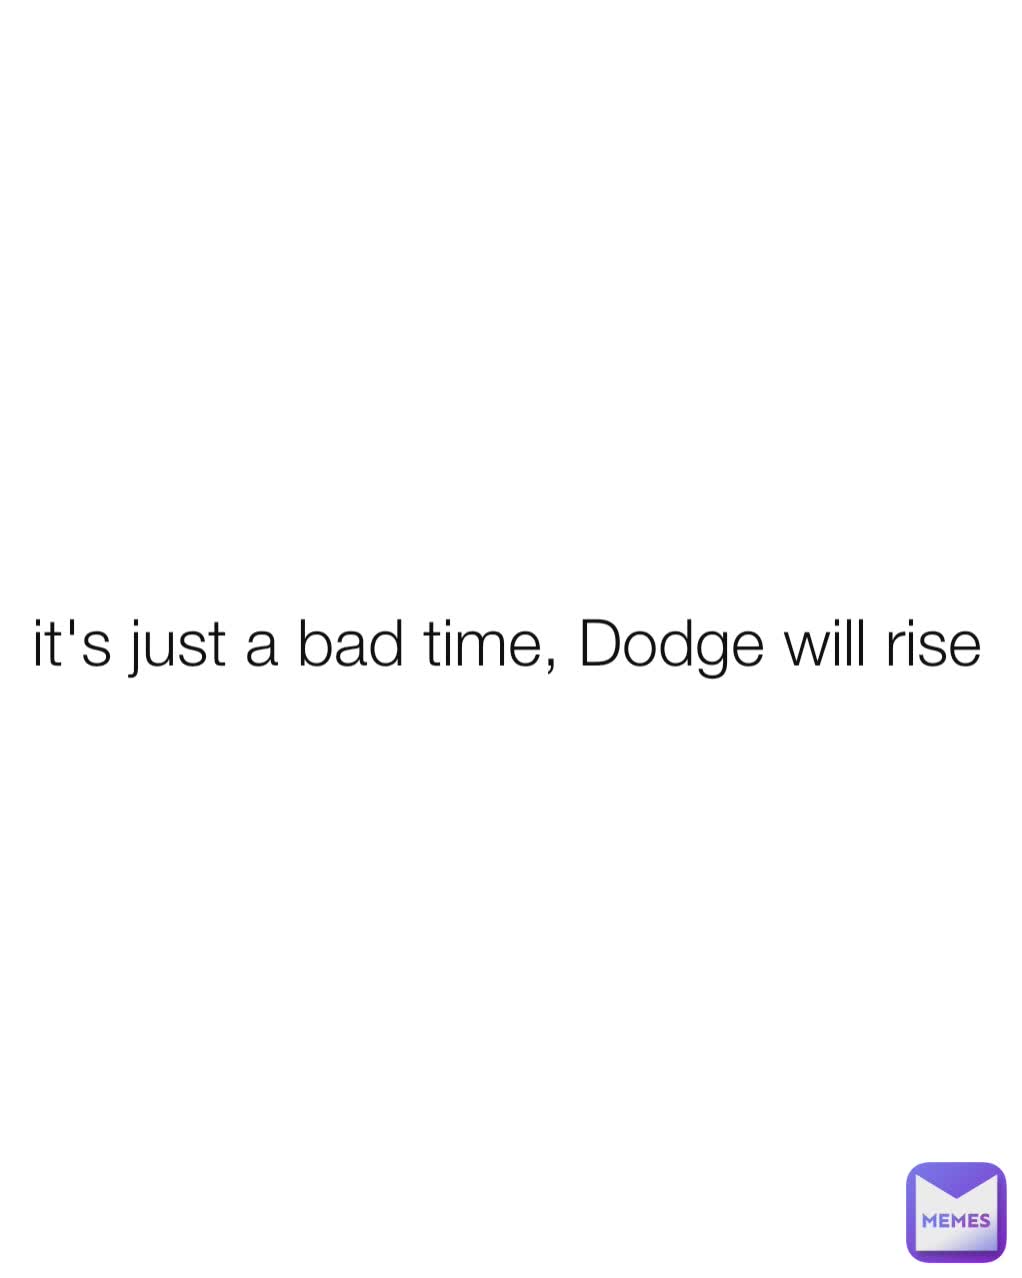 it's just a bad time, Dodge will rise